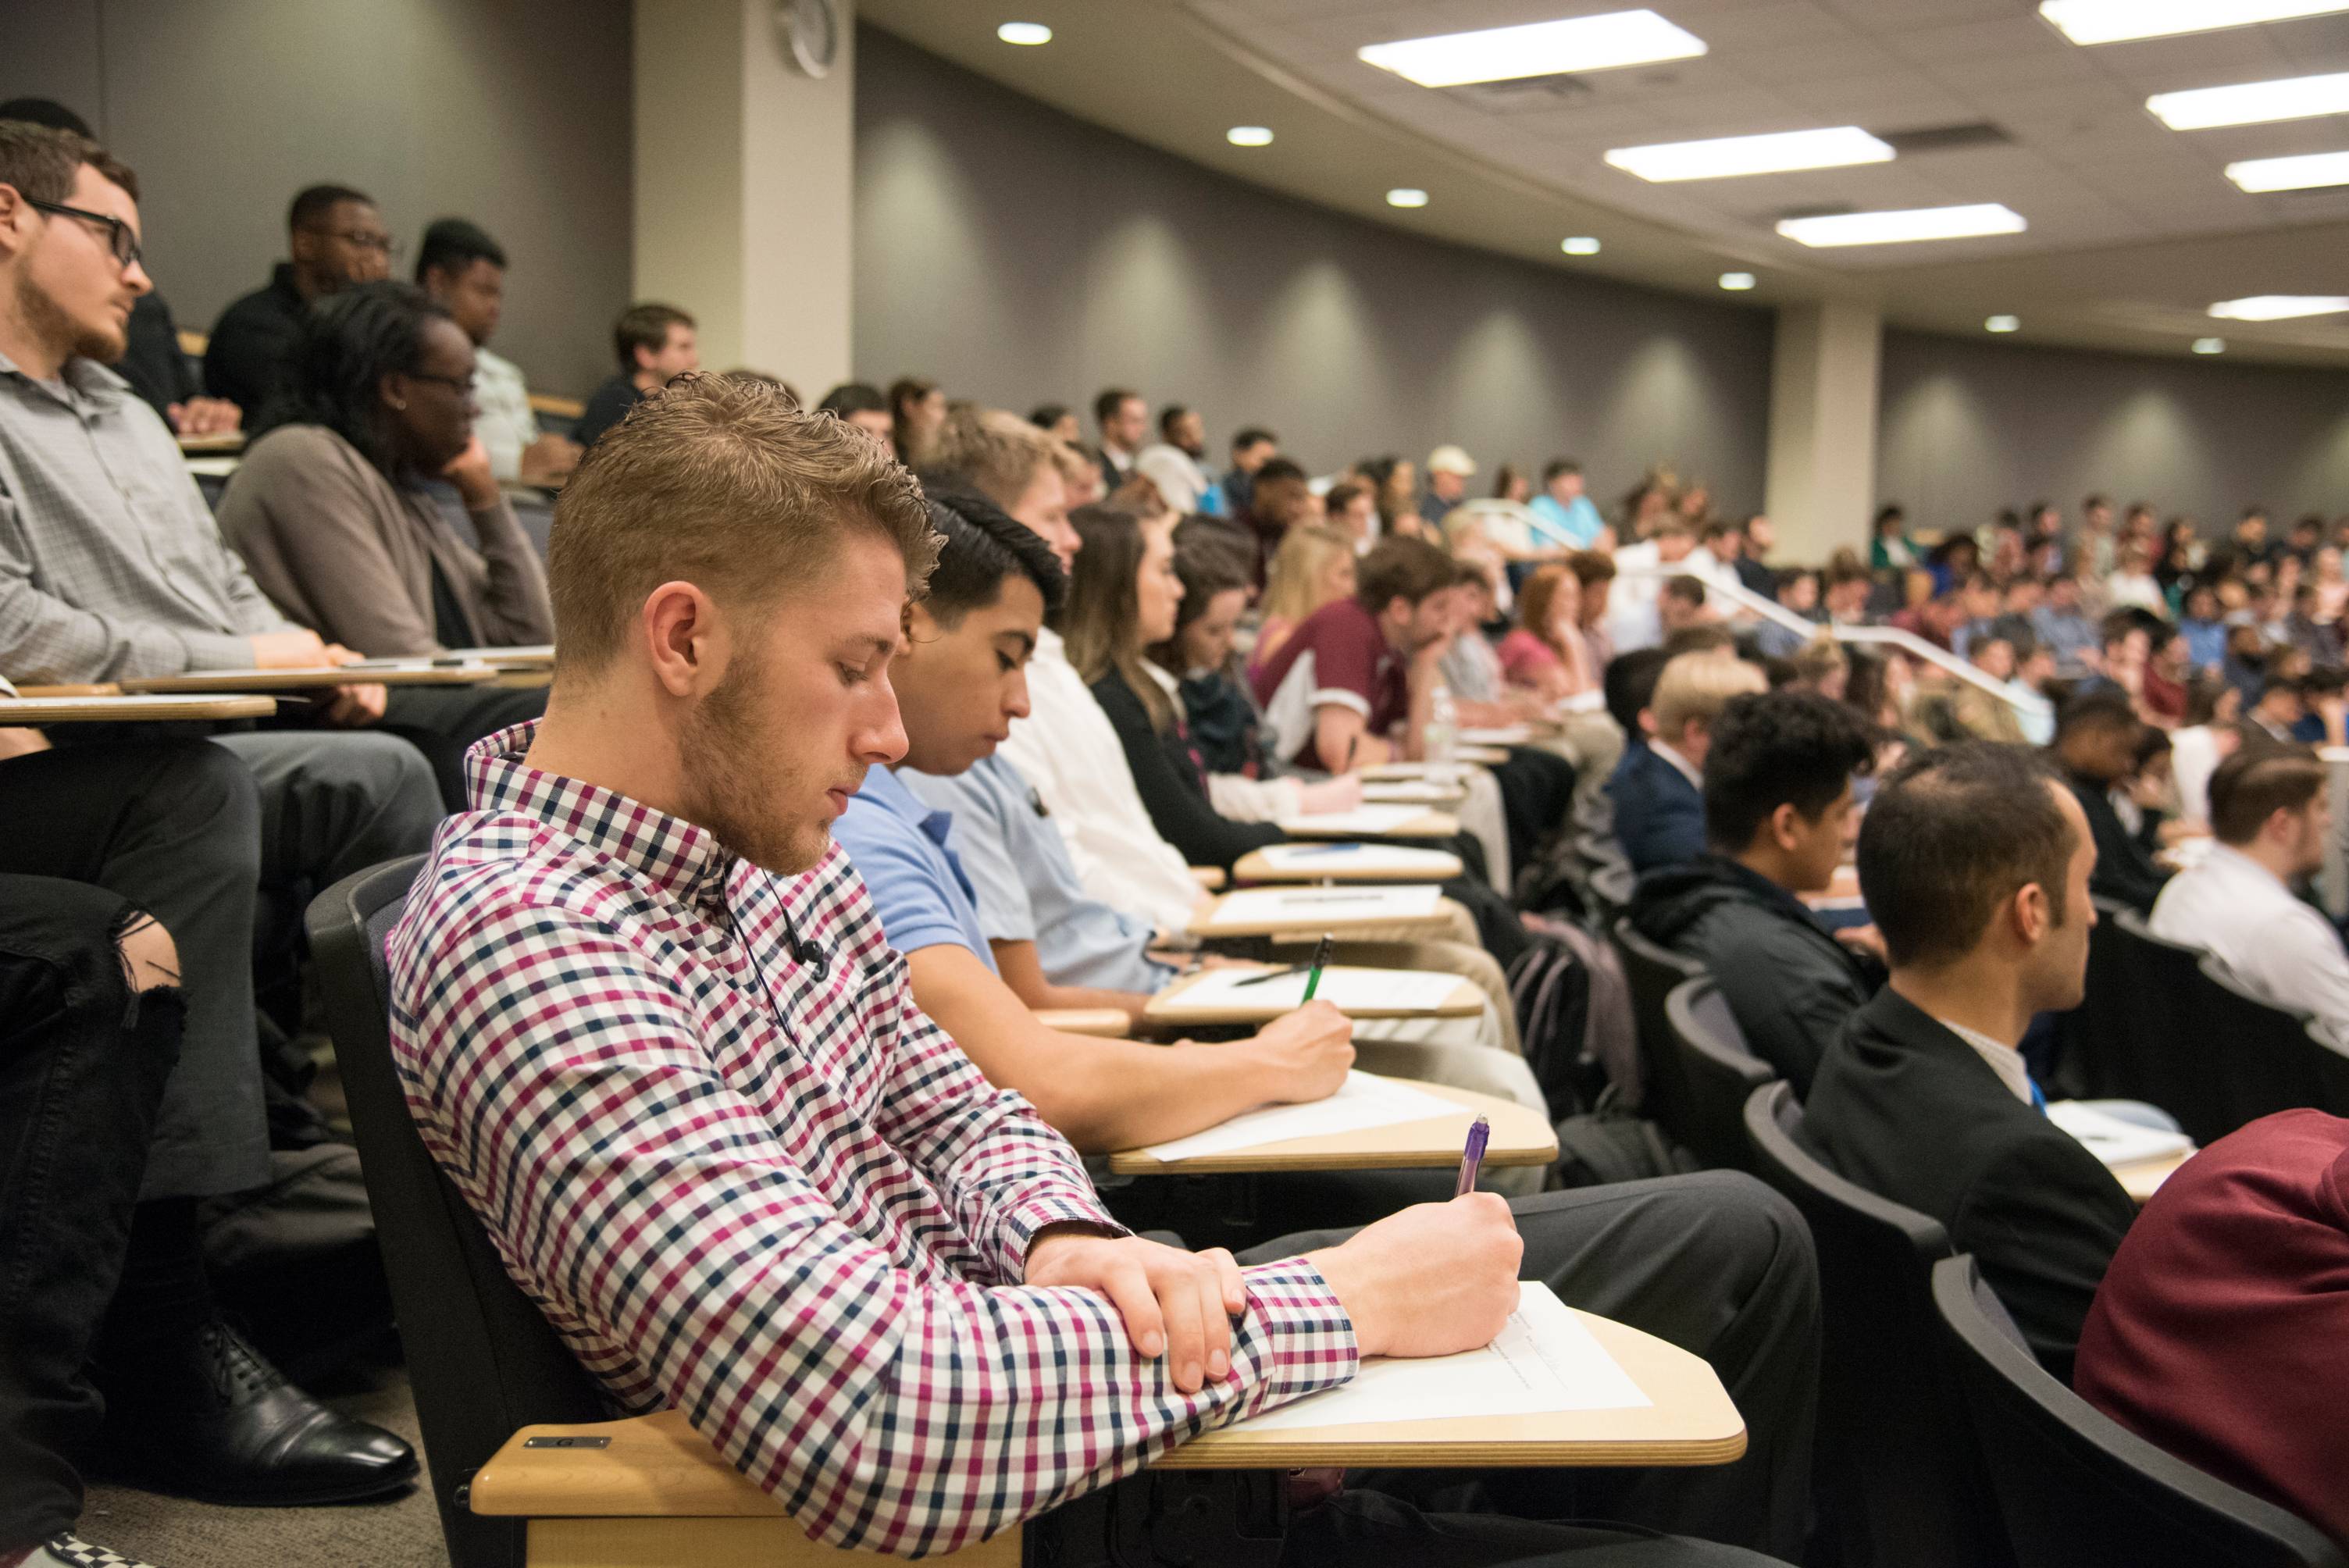 A fully-occupied lecture hall with stadium seating, students look concentrated on listening and taking notes